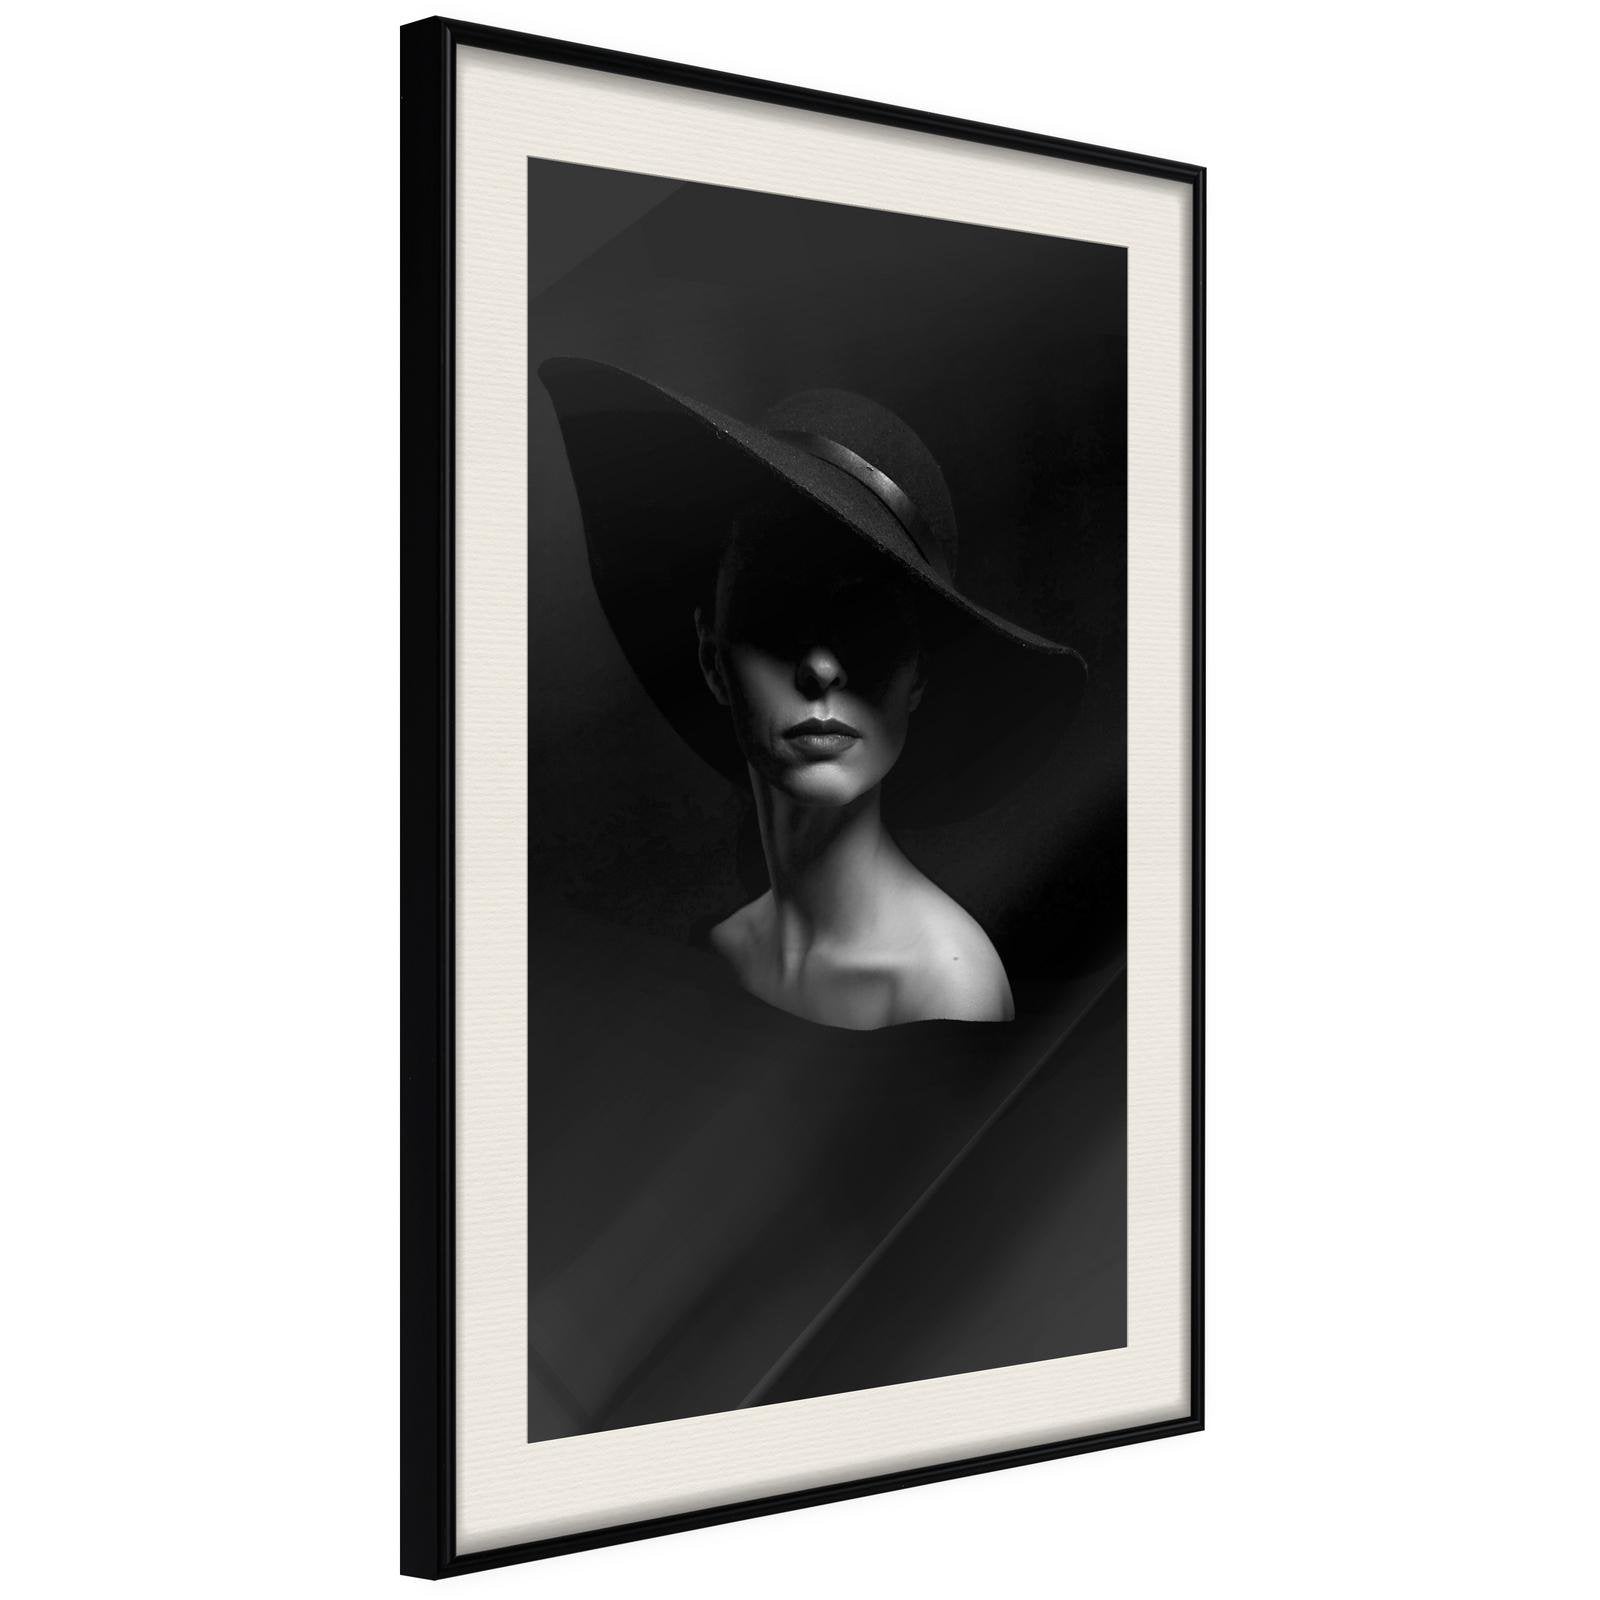 Inramad Poster / Tavla - Woman in a Hat-Poster Inramad-Artgeist-20x30-Svart ram med passepartout-peaceofhome.se